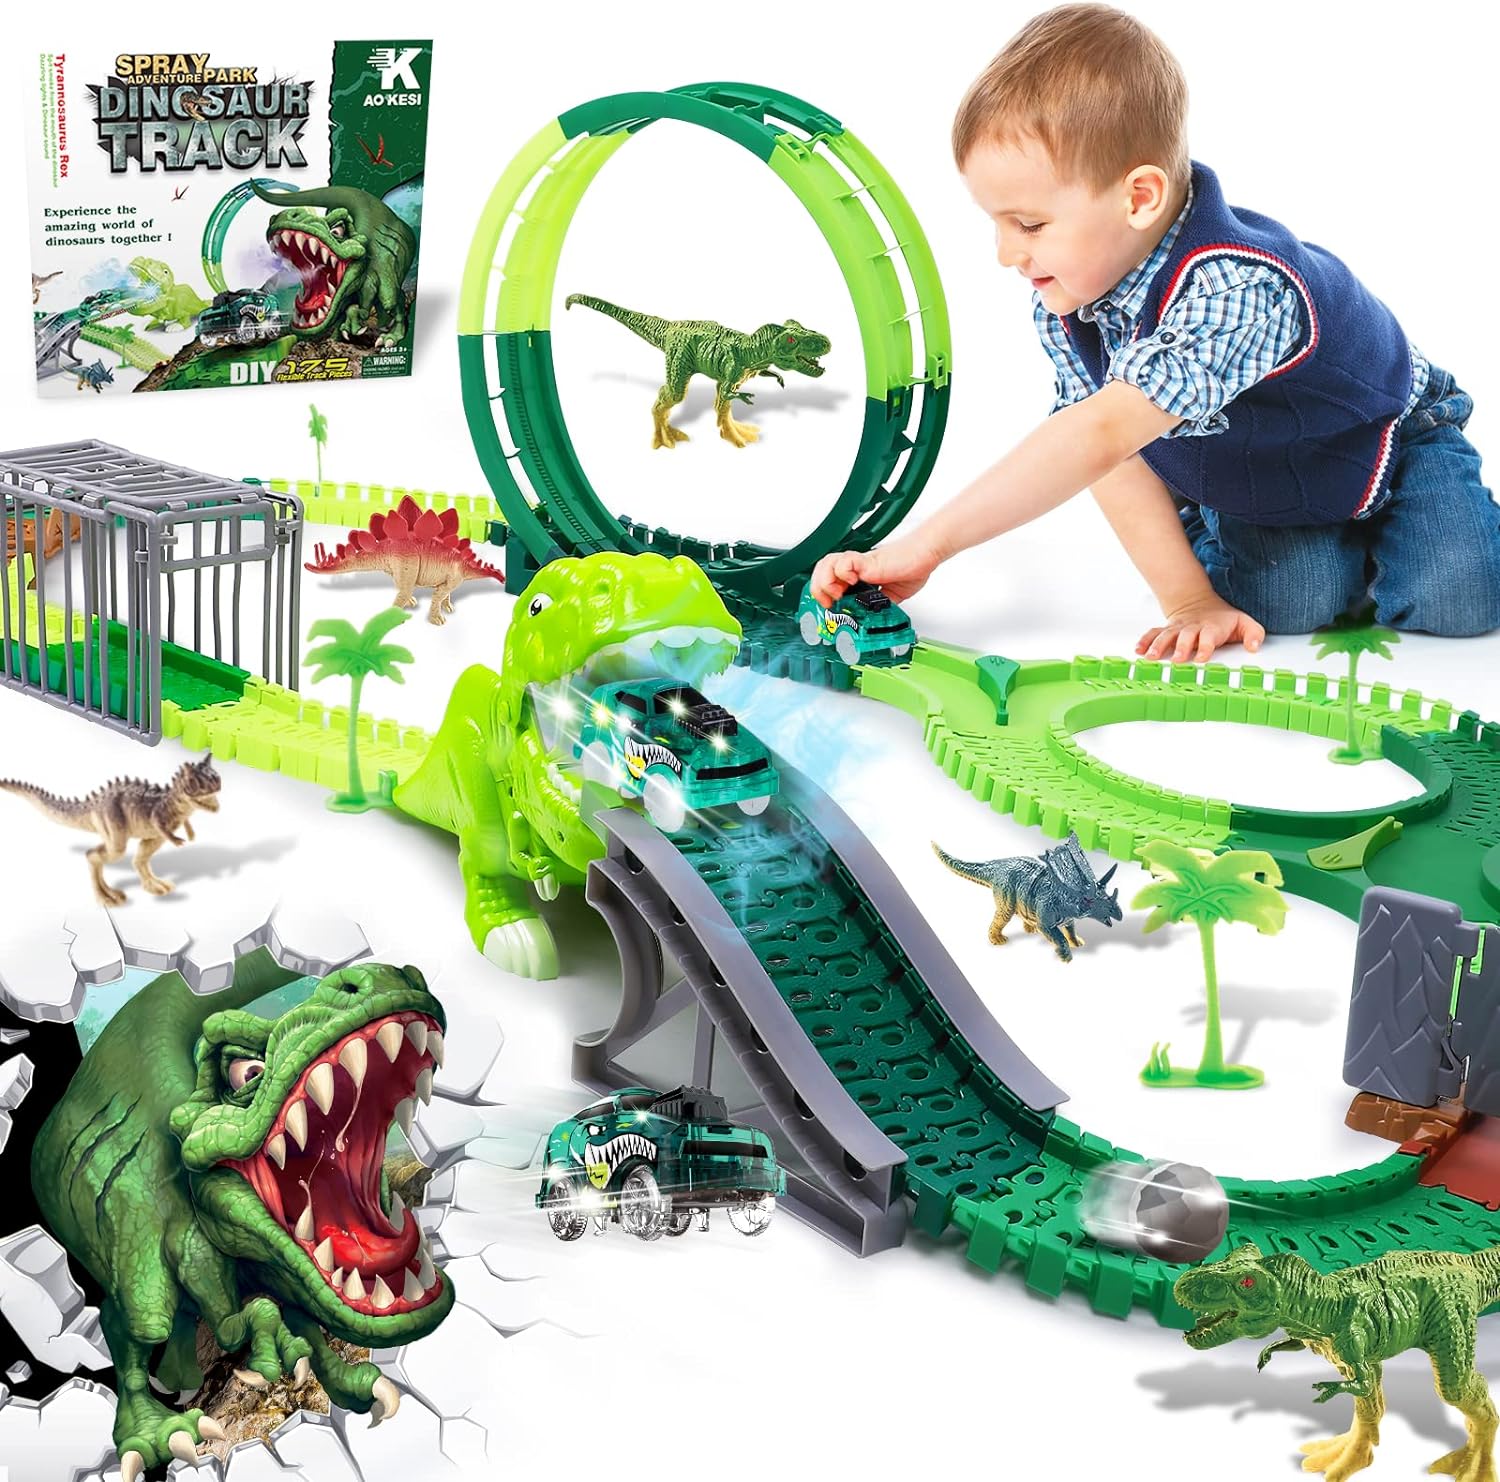 Dinosaurs are so intriguing to my three-year old grandson. In fact, he is going to be one for Halloween. This Dinosaur Train Track Set is perfect for his Jurassic Park play experience. Love that the track pieces can be flexed and configured to form different terrains using the slopes and hanging bridge pieces. What a joy it is to actually find toys such as this which encourage the use of his creative abilities. I can say that this play set does just that!